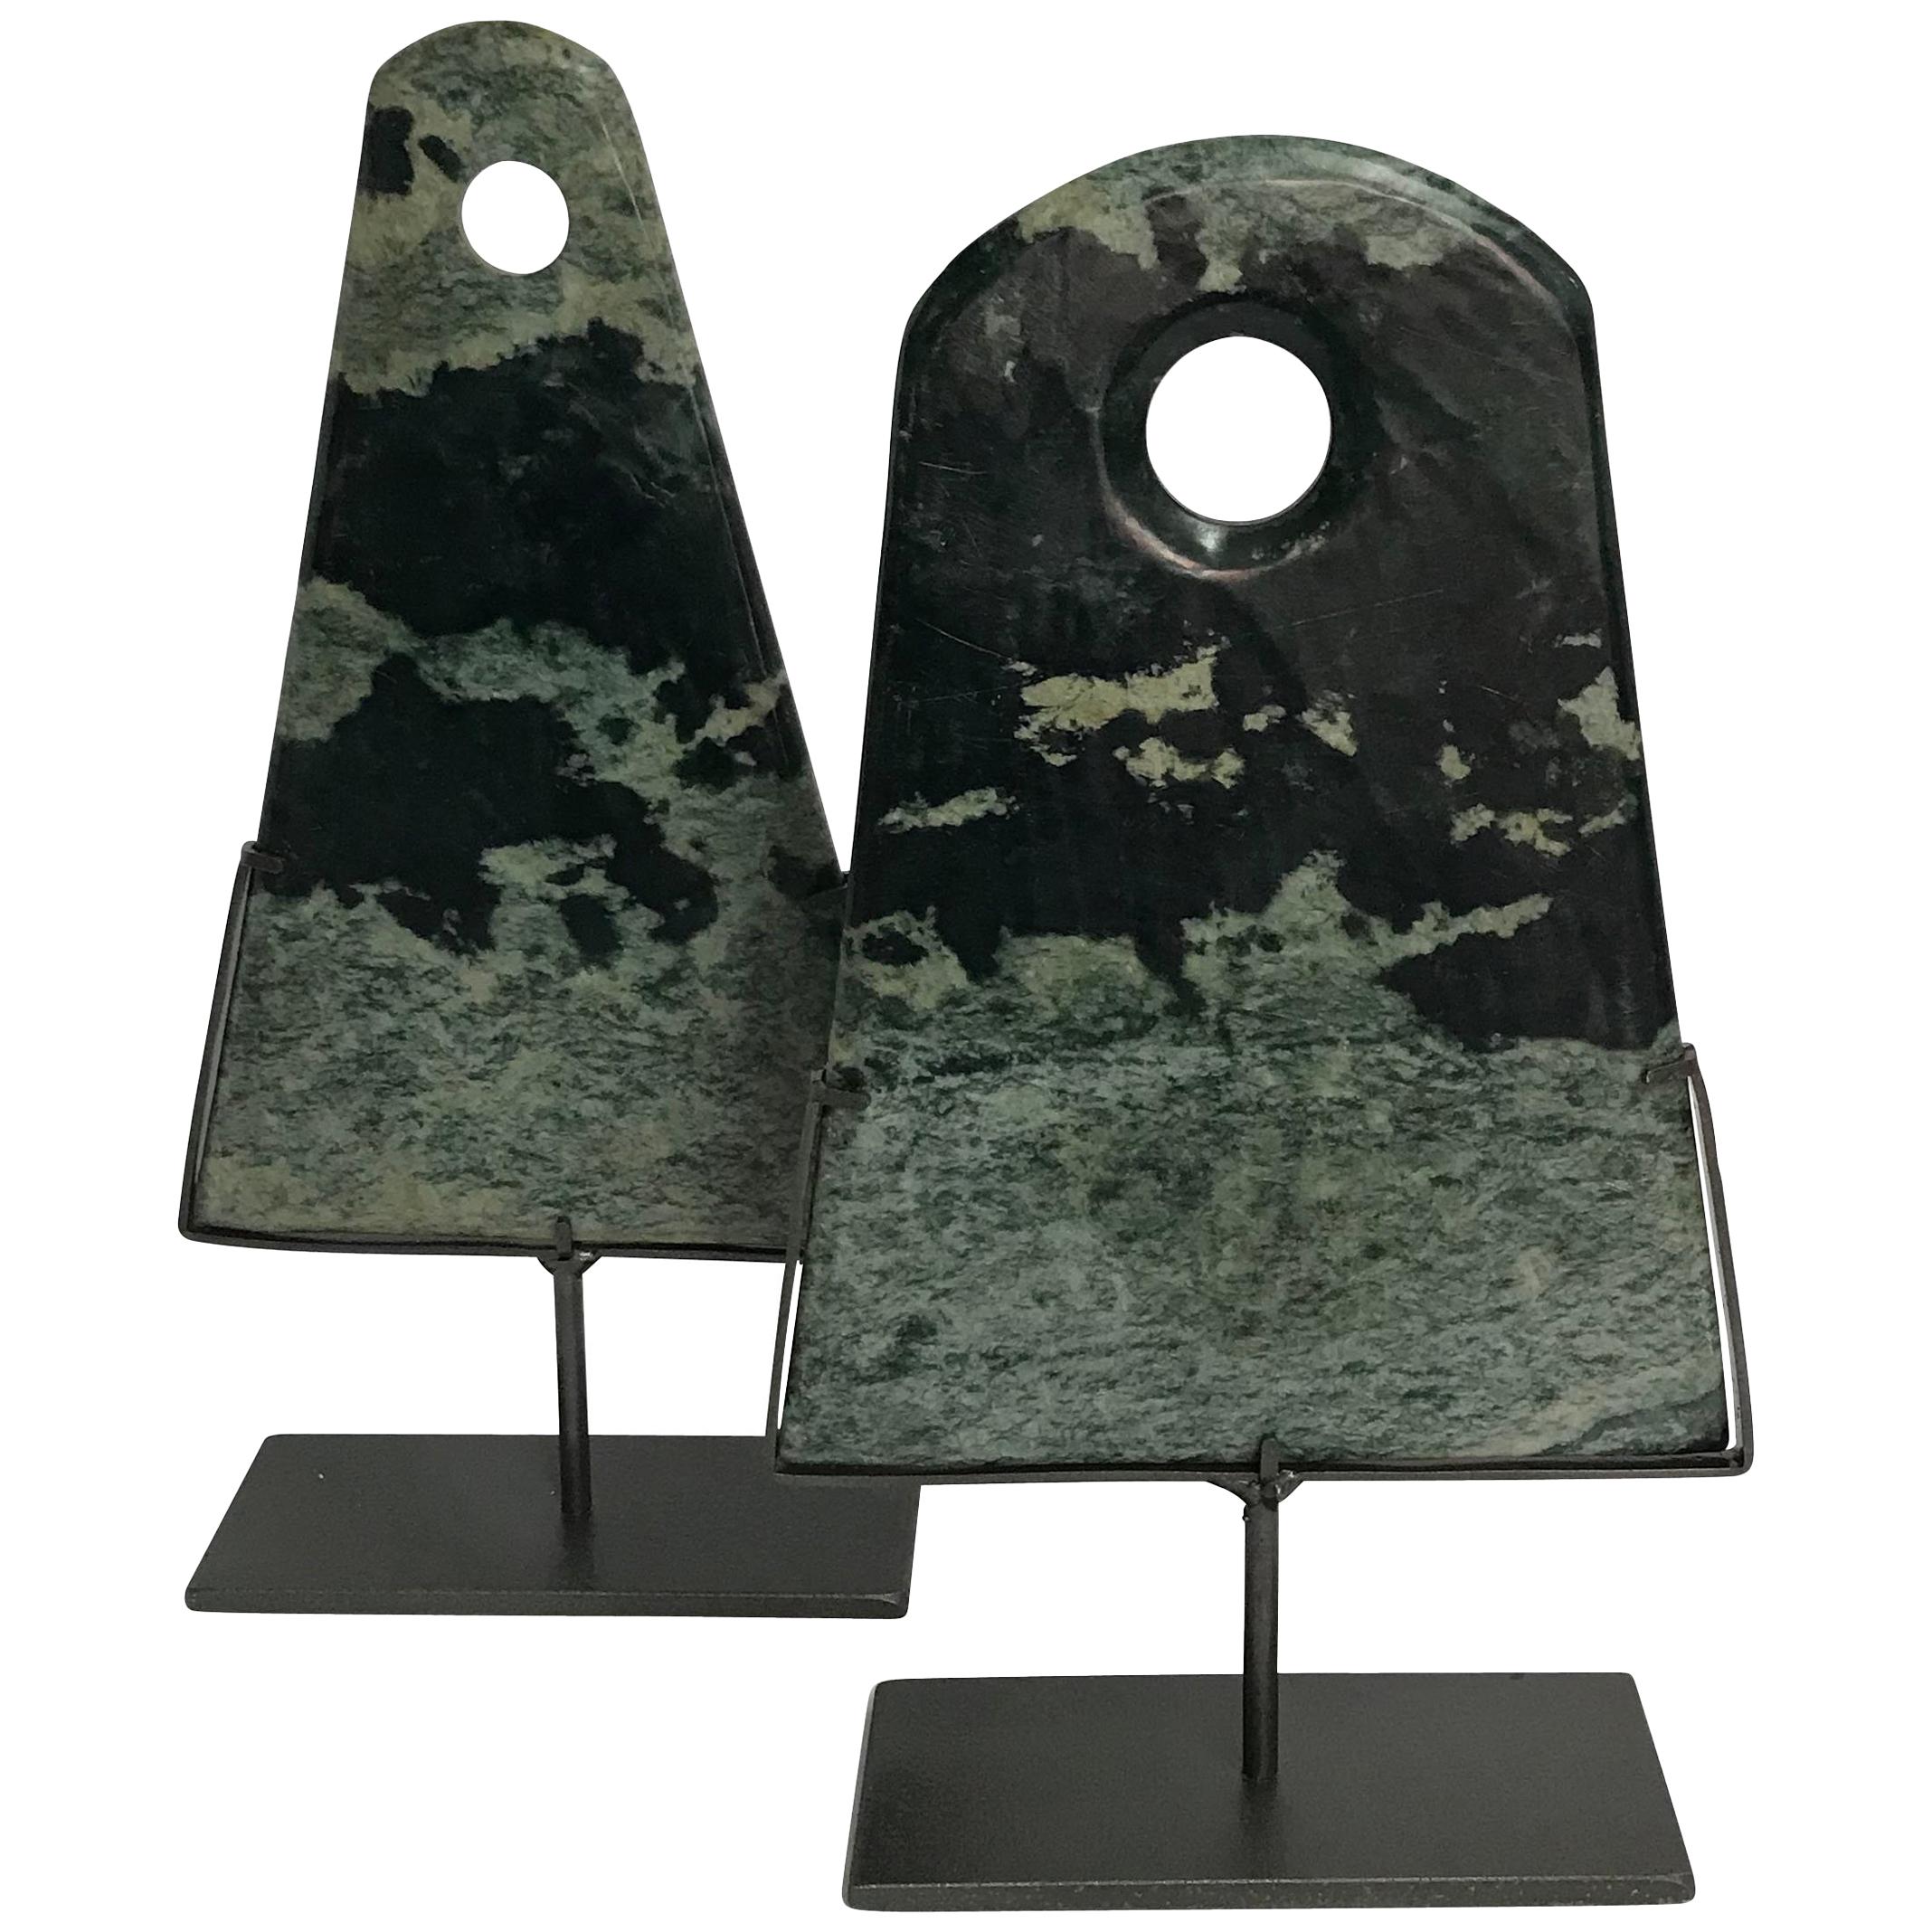 Green Set of Two Triangle Shaped Stone Disc Sculptures, China, Contemporary